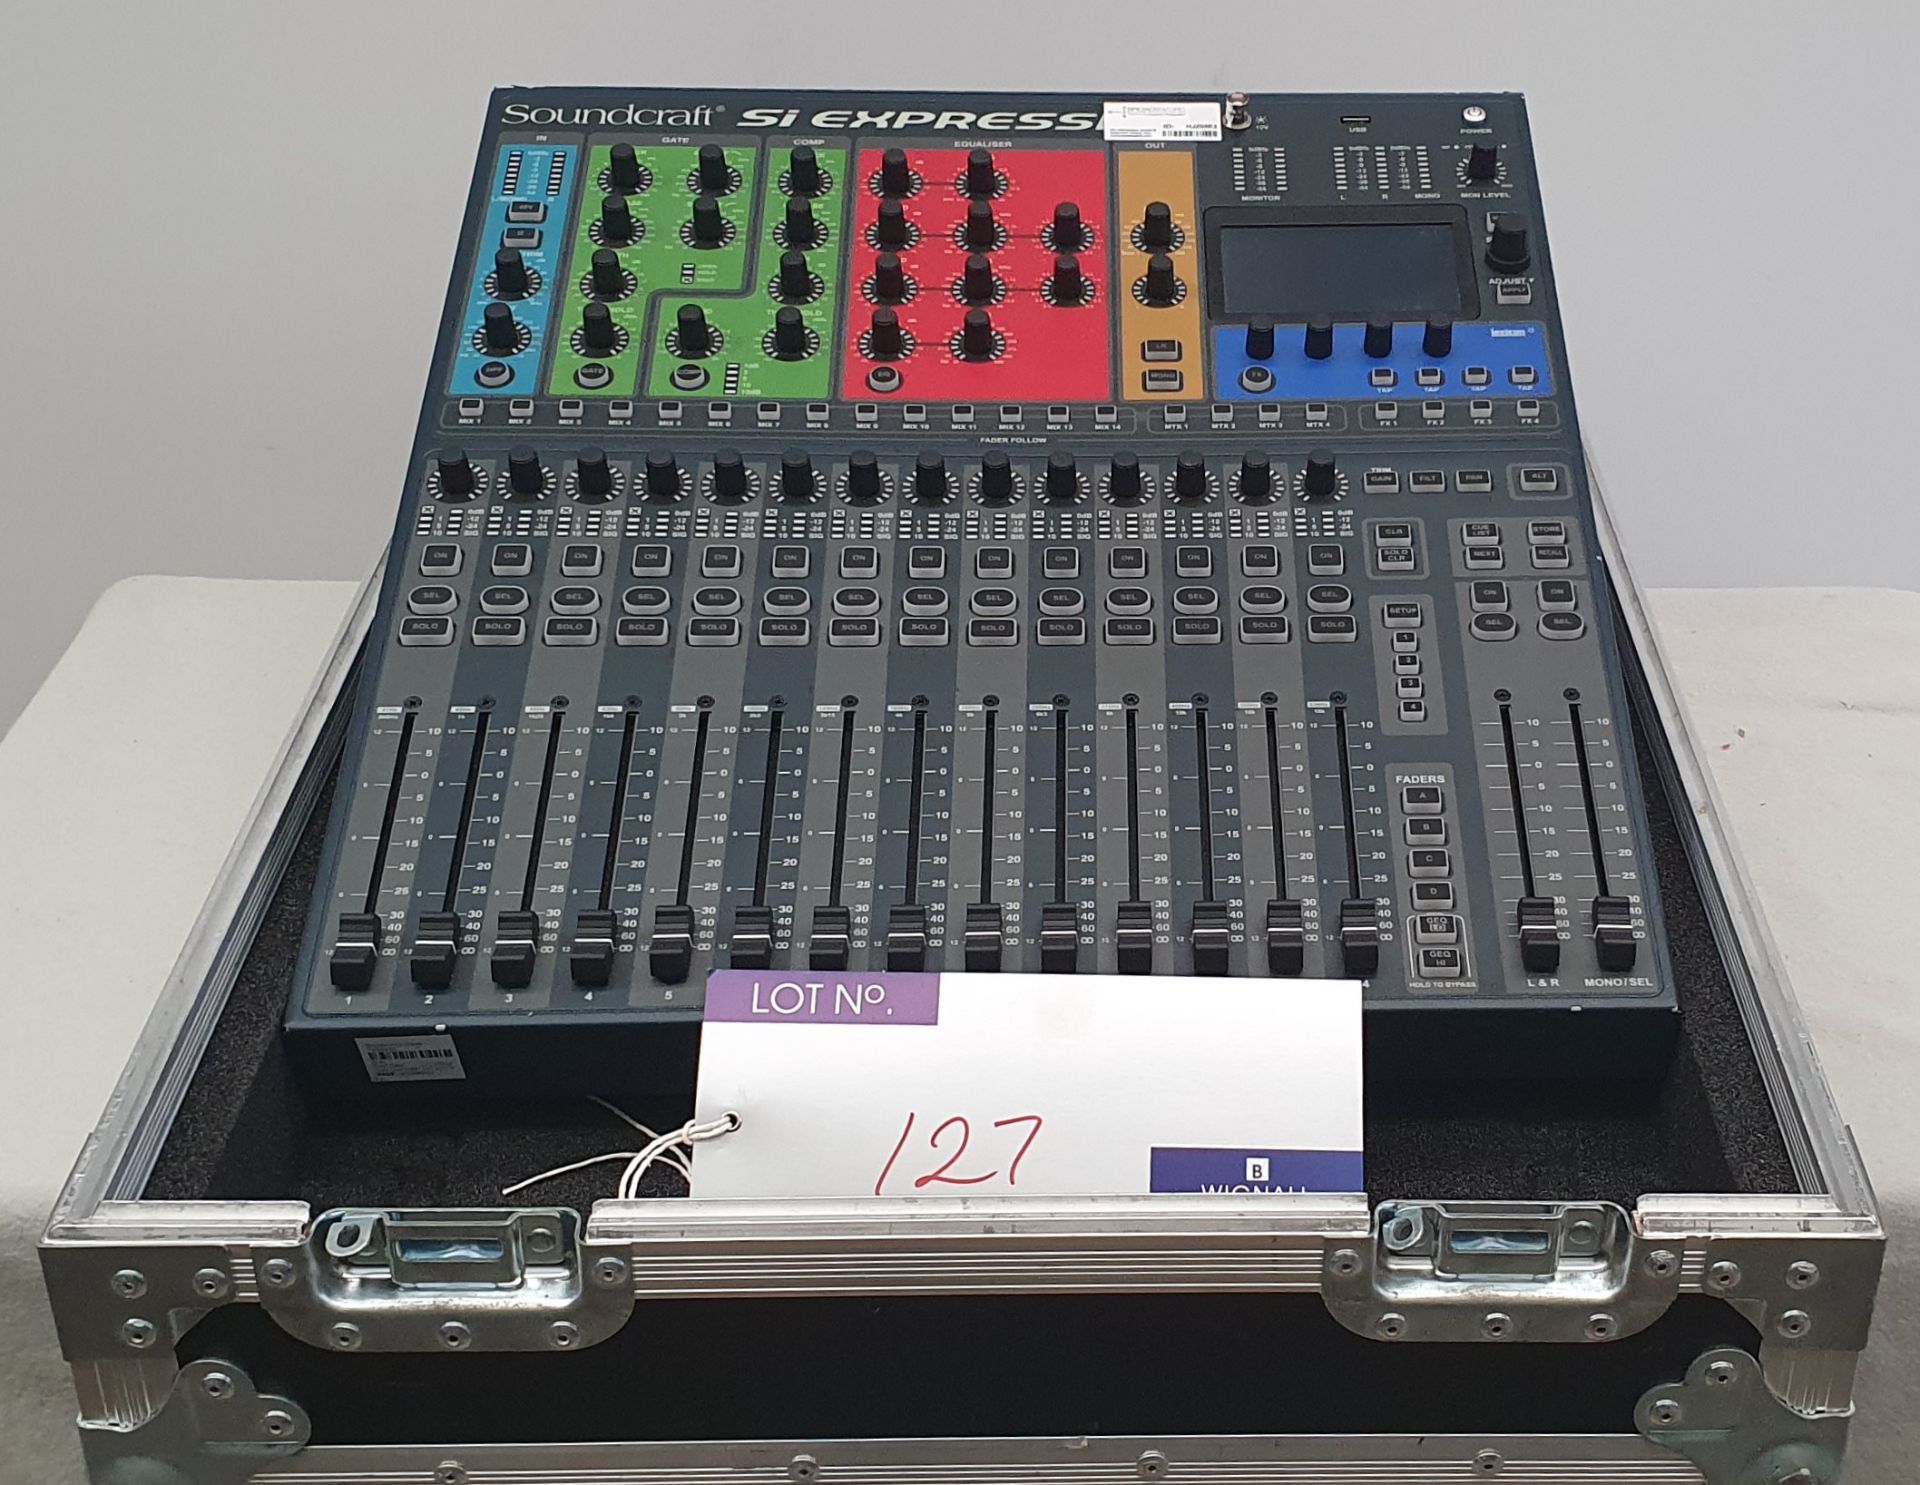 A Soundcraft Si Expression 1 Digital Mixing Desk with flight case, 700mm x 520mm x 250mm.